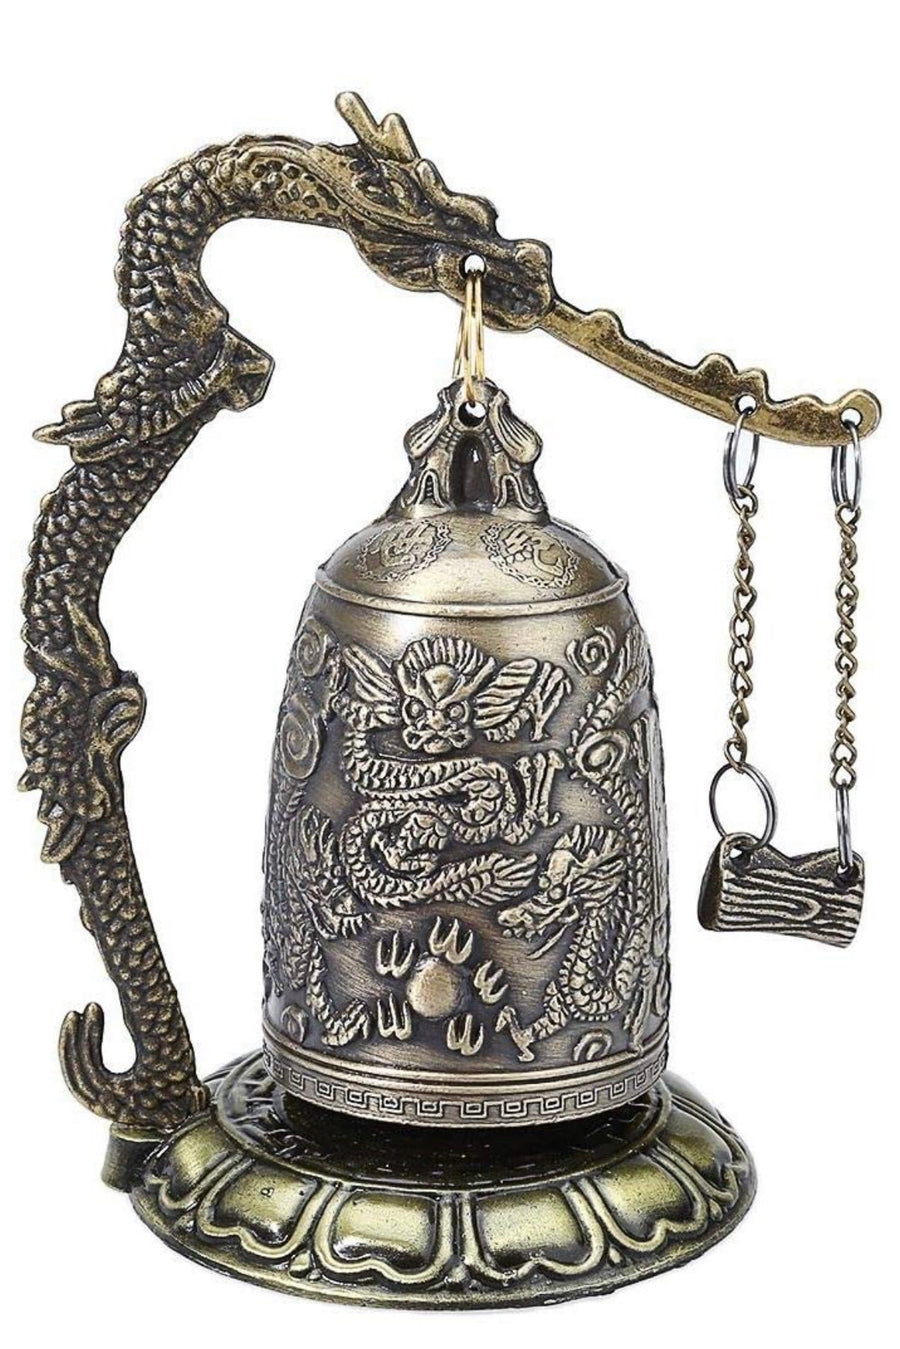 Buddhism Temple Brass Copper Dragon Bell Clock Carved Statue Lotus Buddha Buddhism Arts Statue Clock Home Decorative Crafts - Ruth Envision